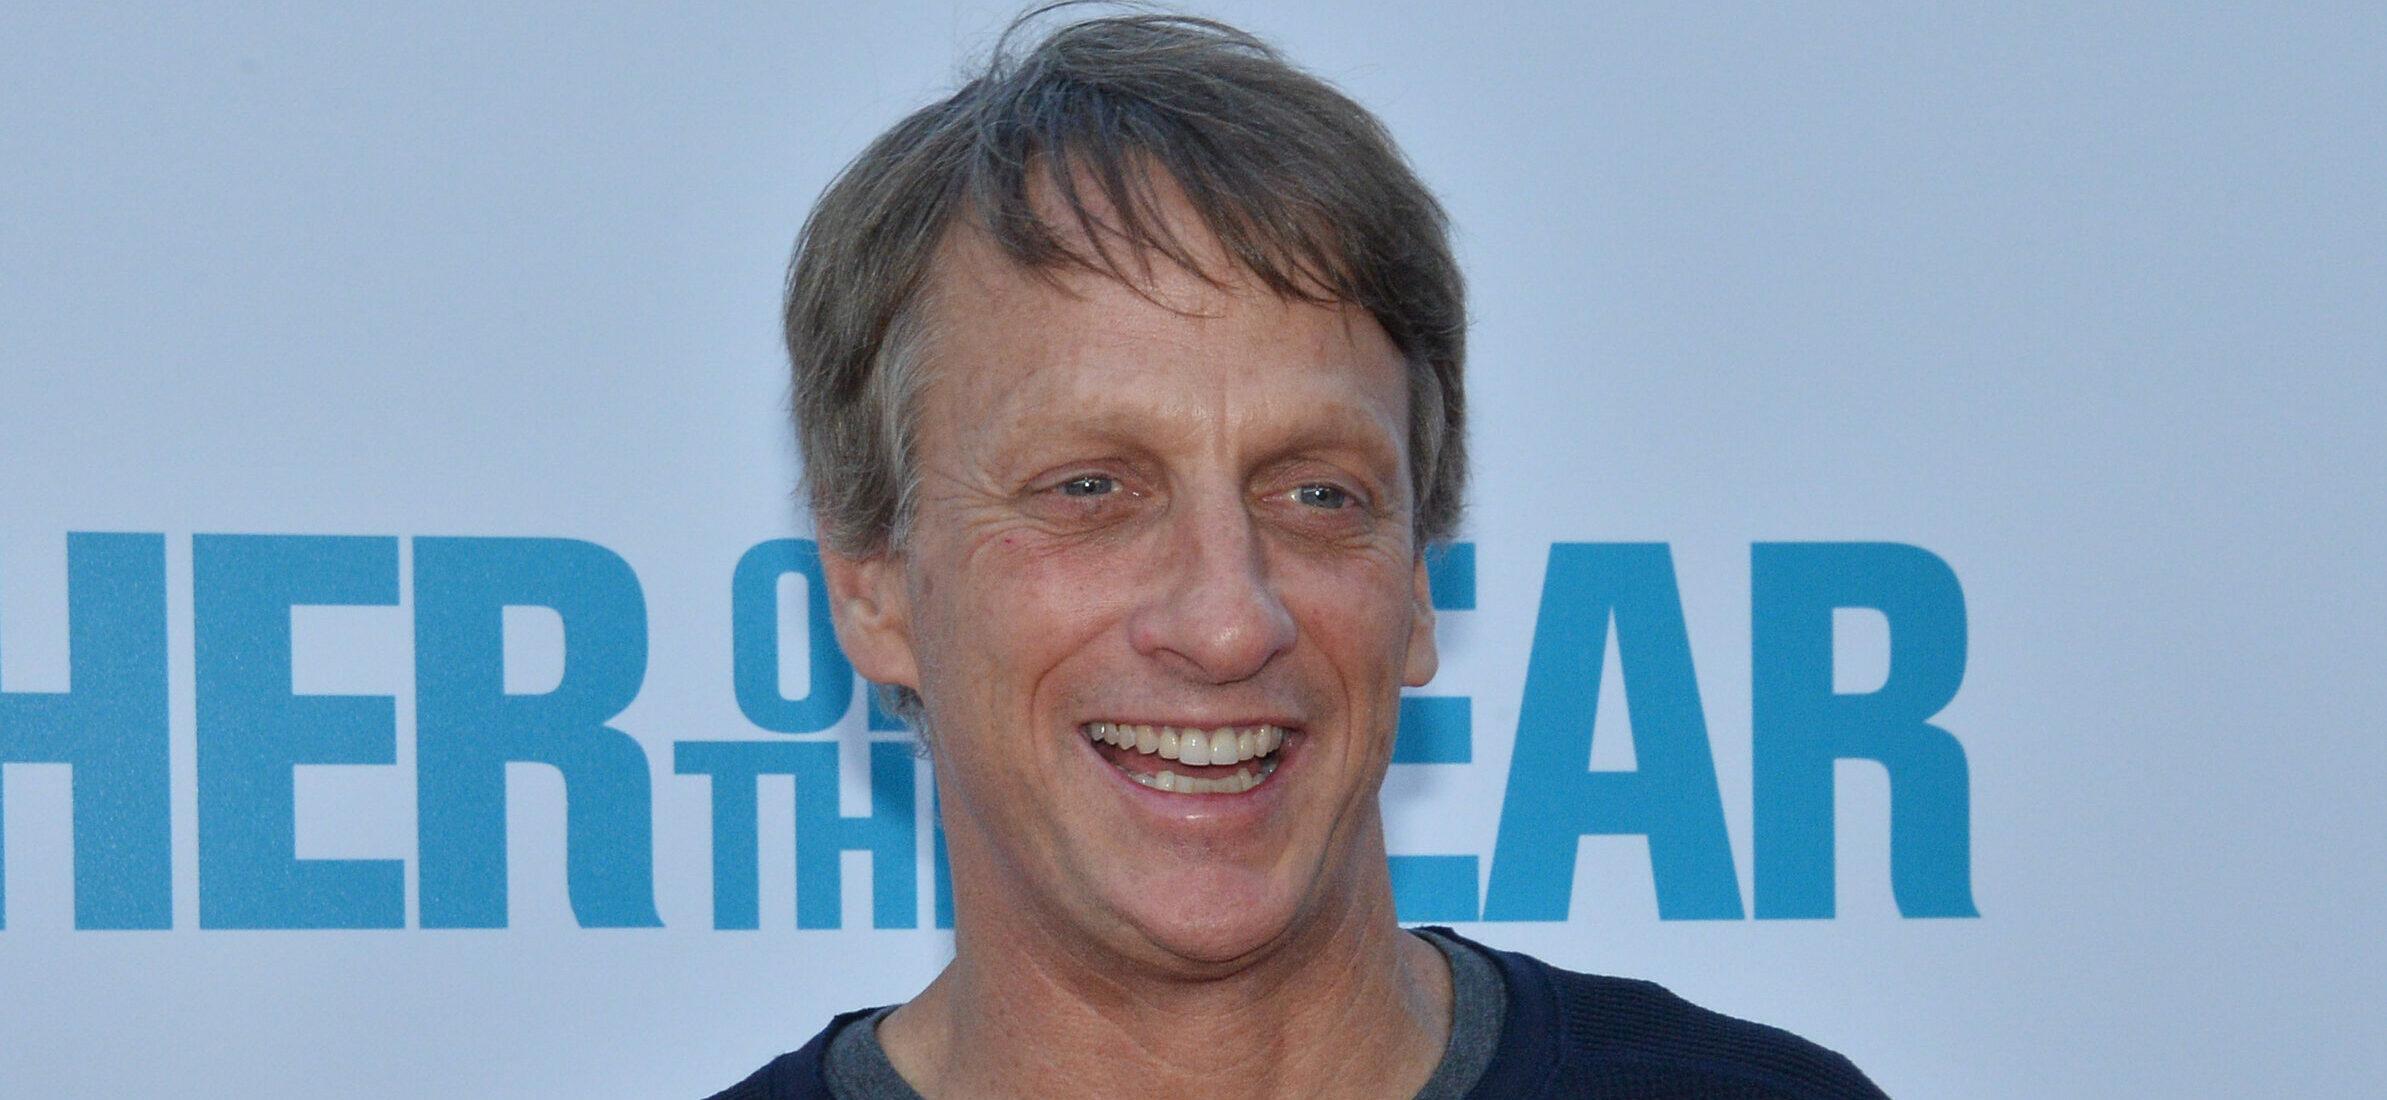 Tony Hawk at the "Father of the Year" premiere in Los Angeles